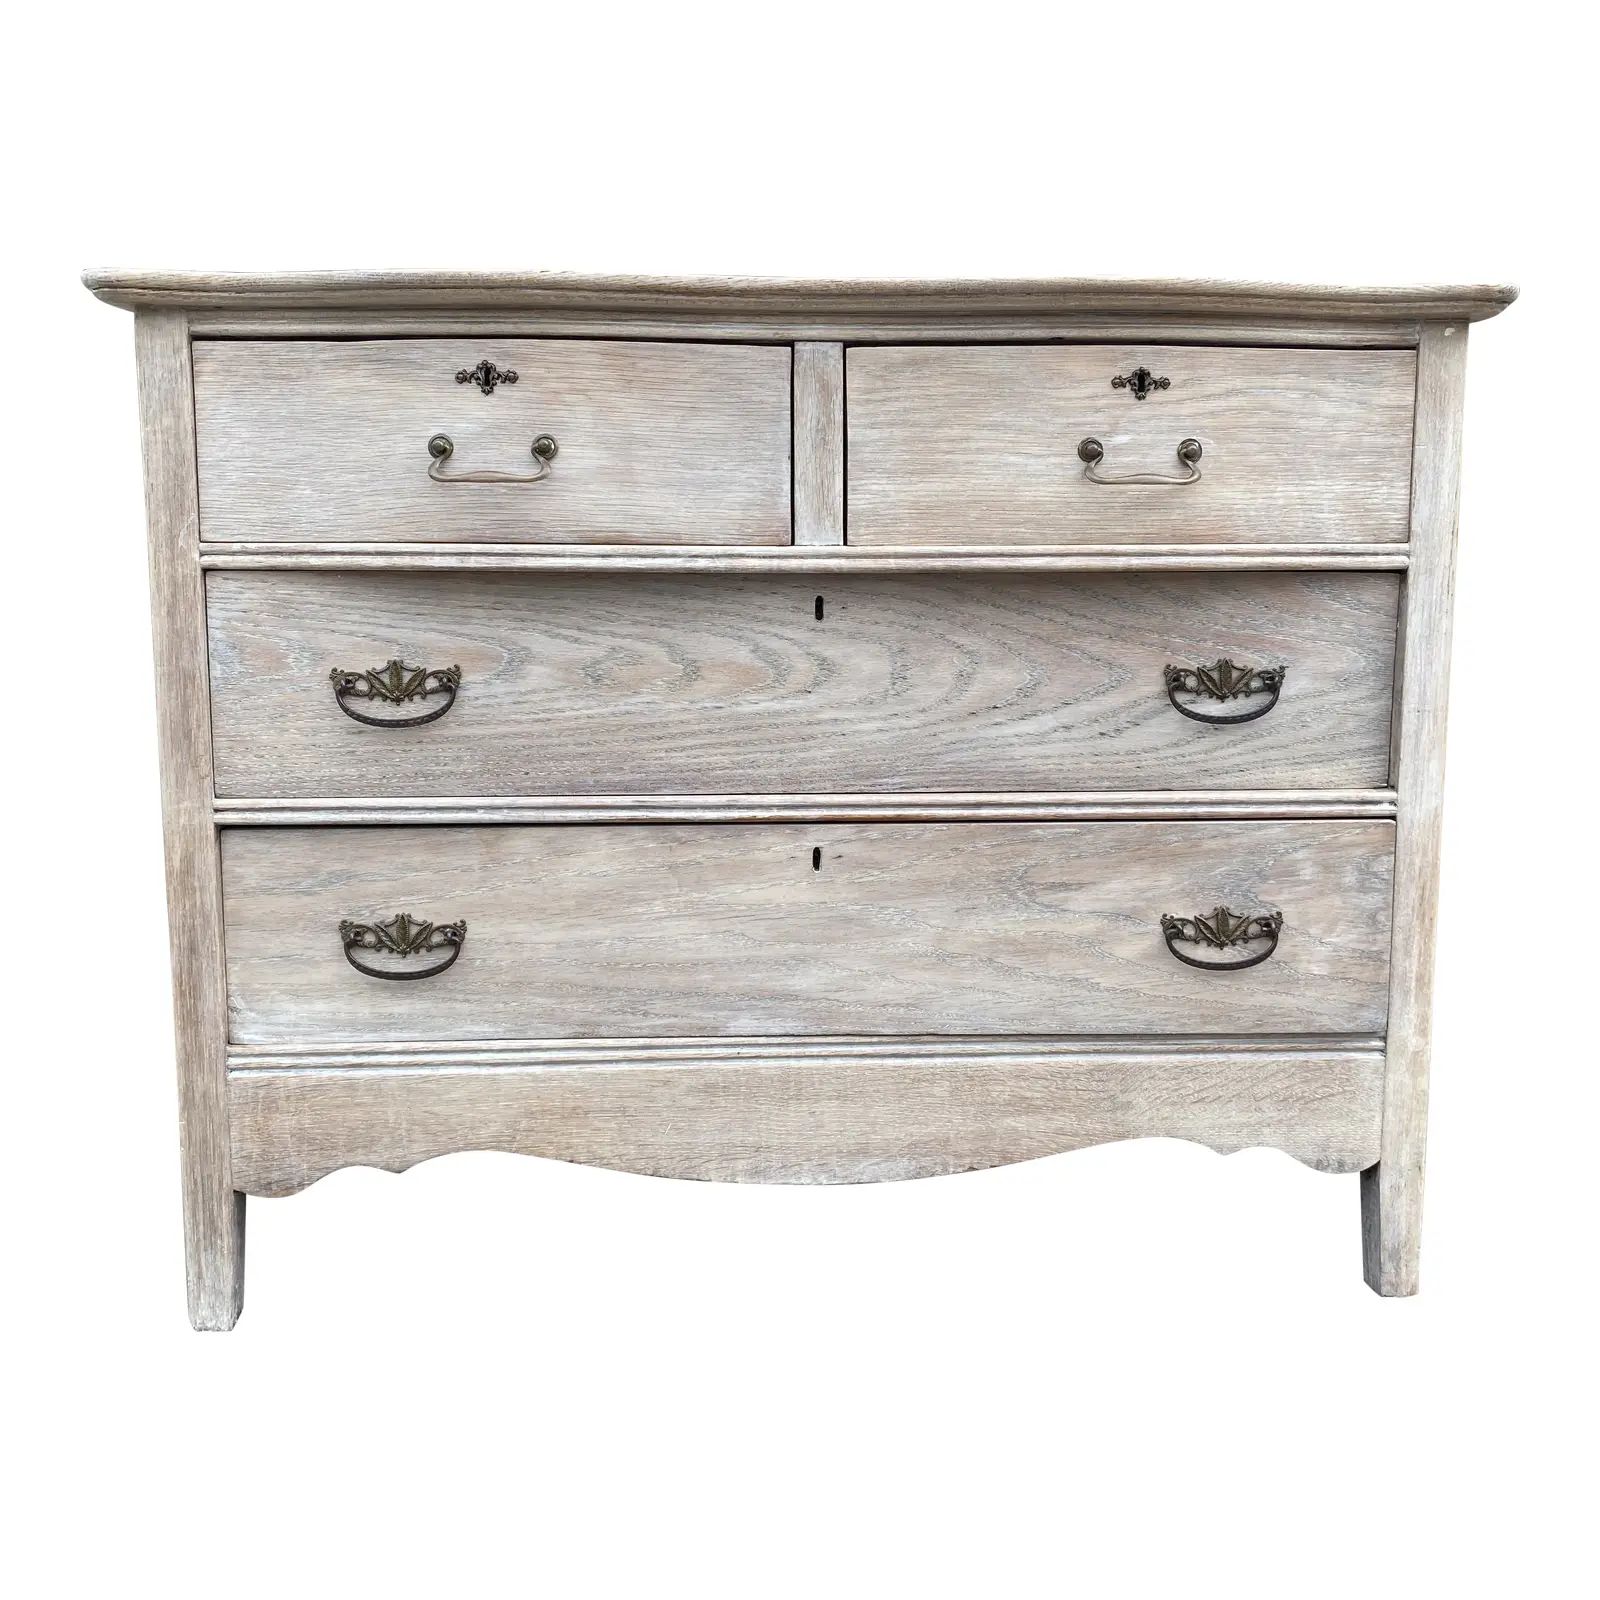 Antique 4 Drawer Bleached Wood Chest | Chairish